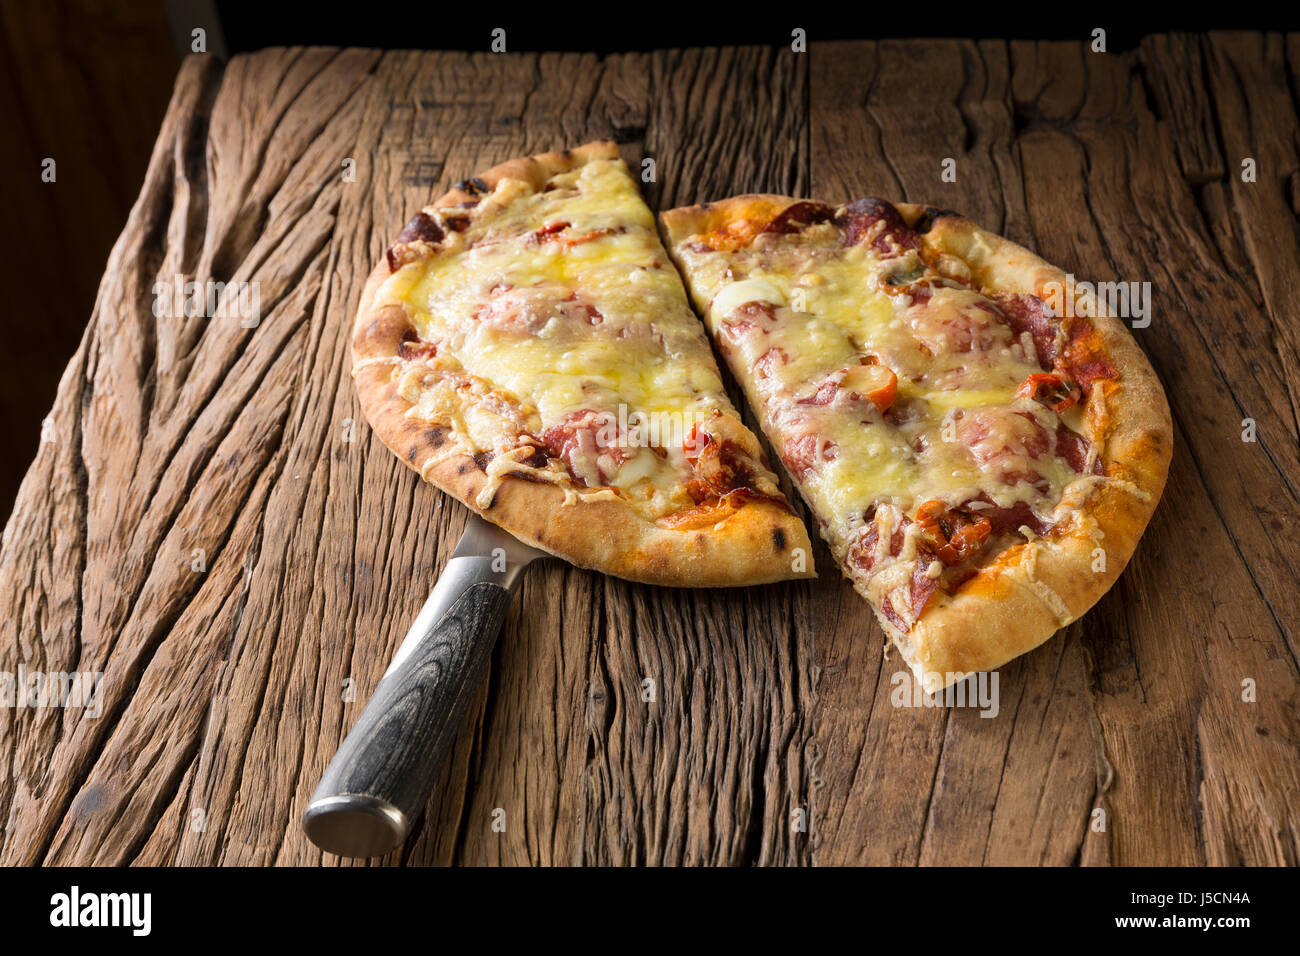 Fresh italian pizza served on a rustic wooden table. Stock Photo